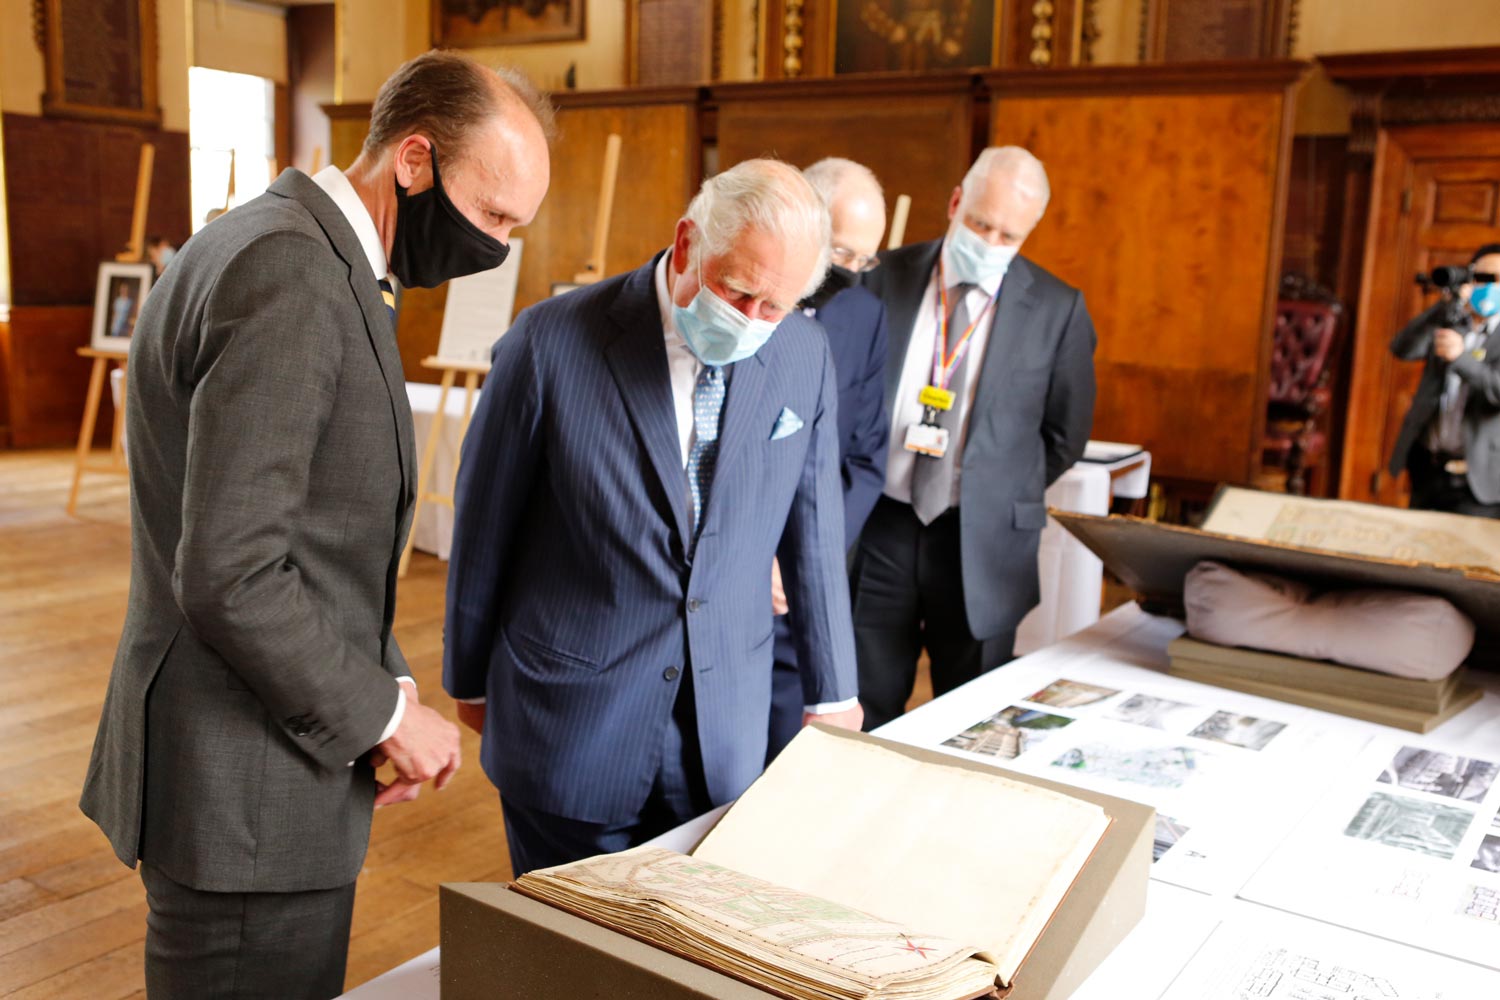 HRH The Prince of Wales visits the Great Hall